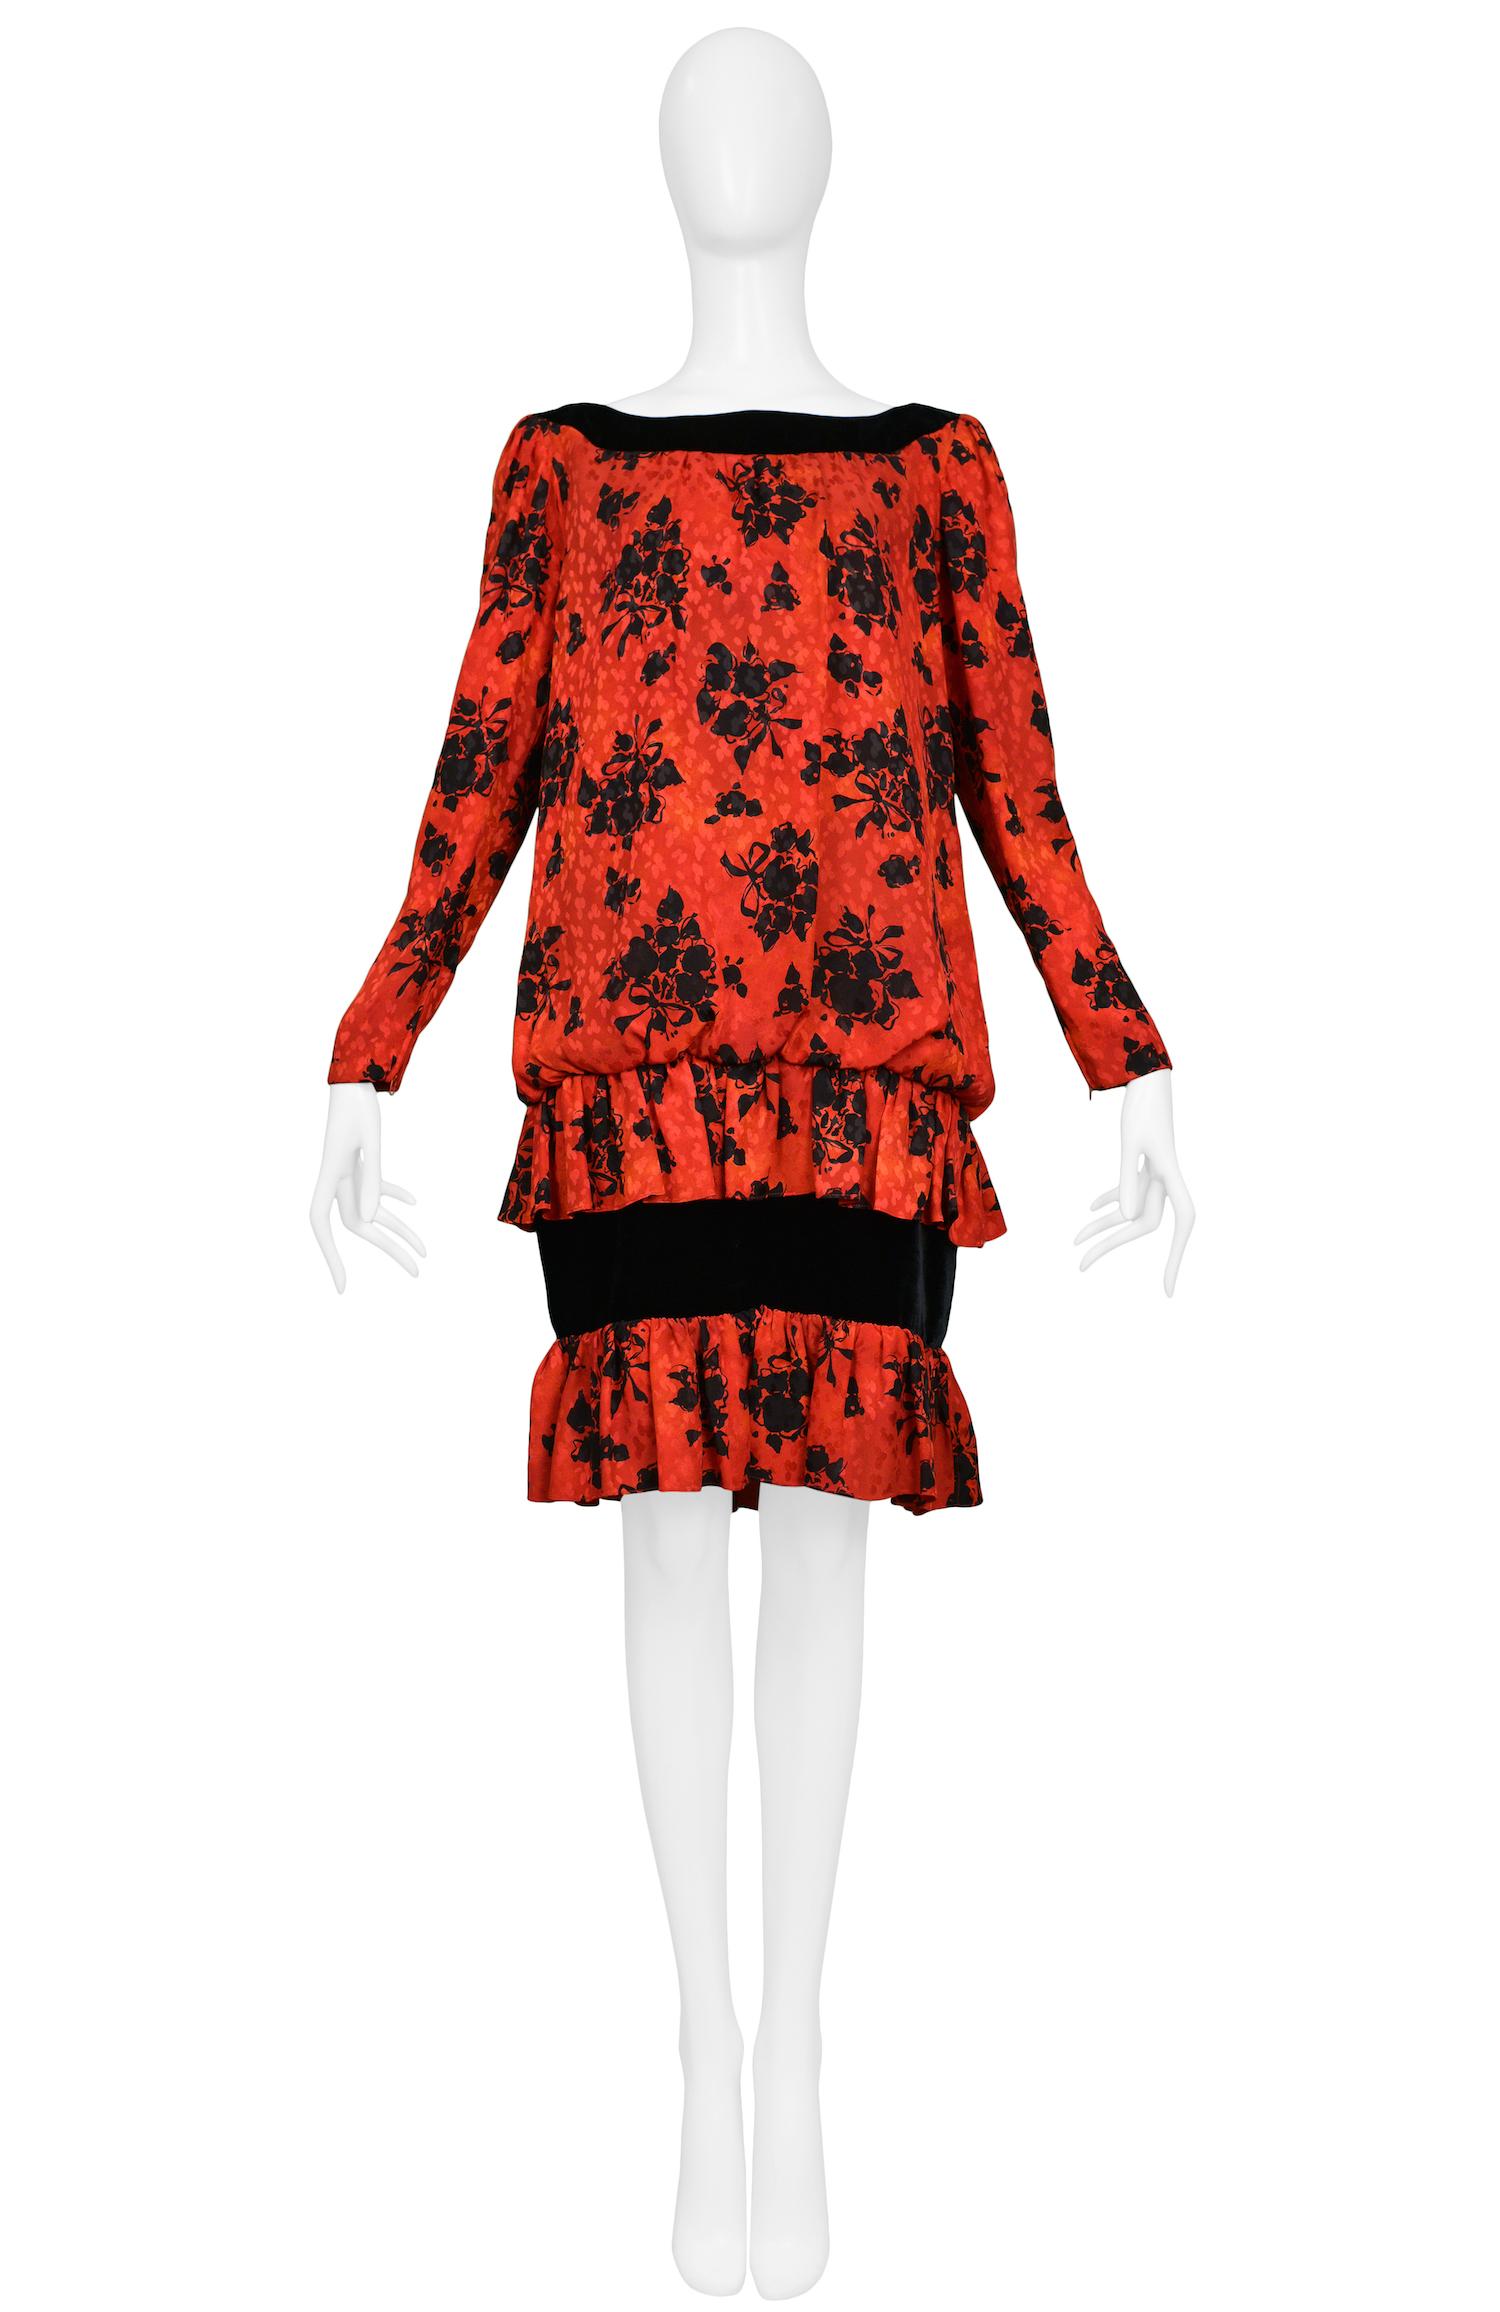 Resurrection Vintage is excited to offer a vintage black floral print Yves Saint Laurent red silk drop waist dress with velvet detailing. The dress features an open neck, straight sleeves, and knee-length.

Yves Saint Laurent
Size 38
Silk and